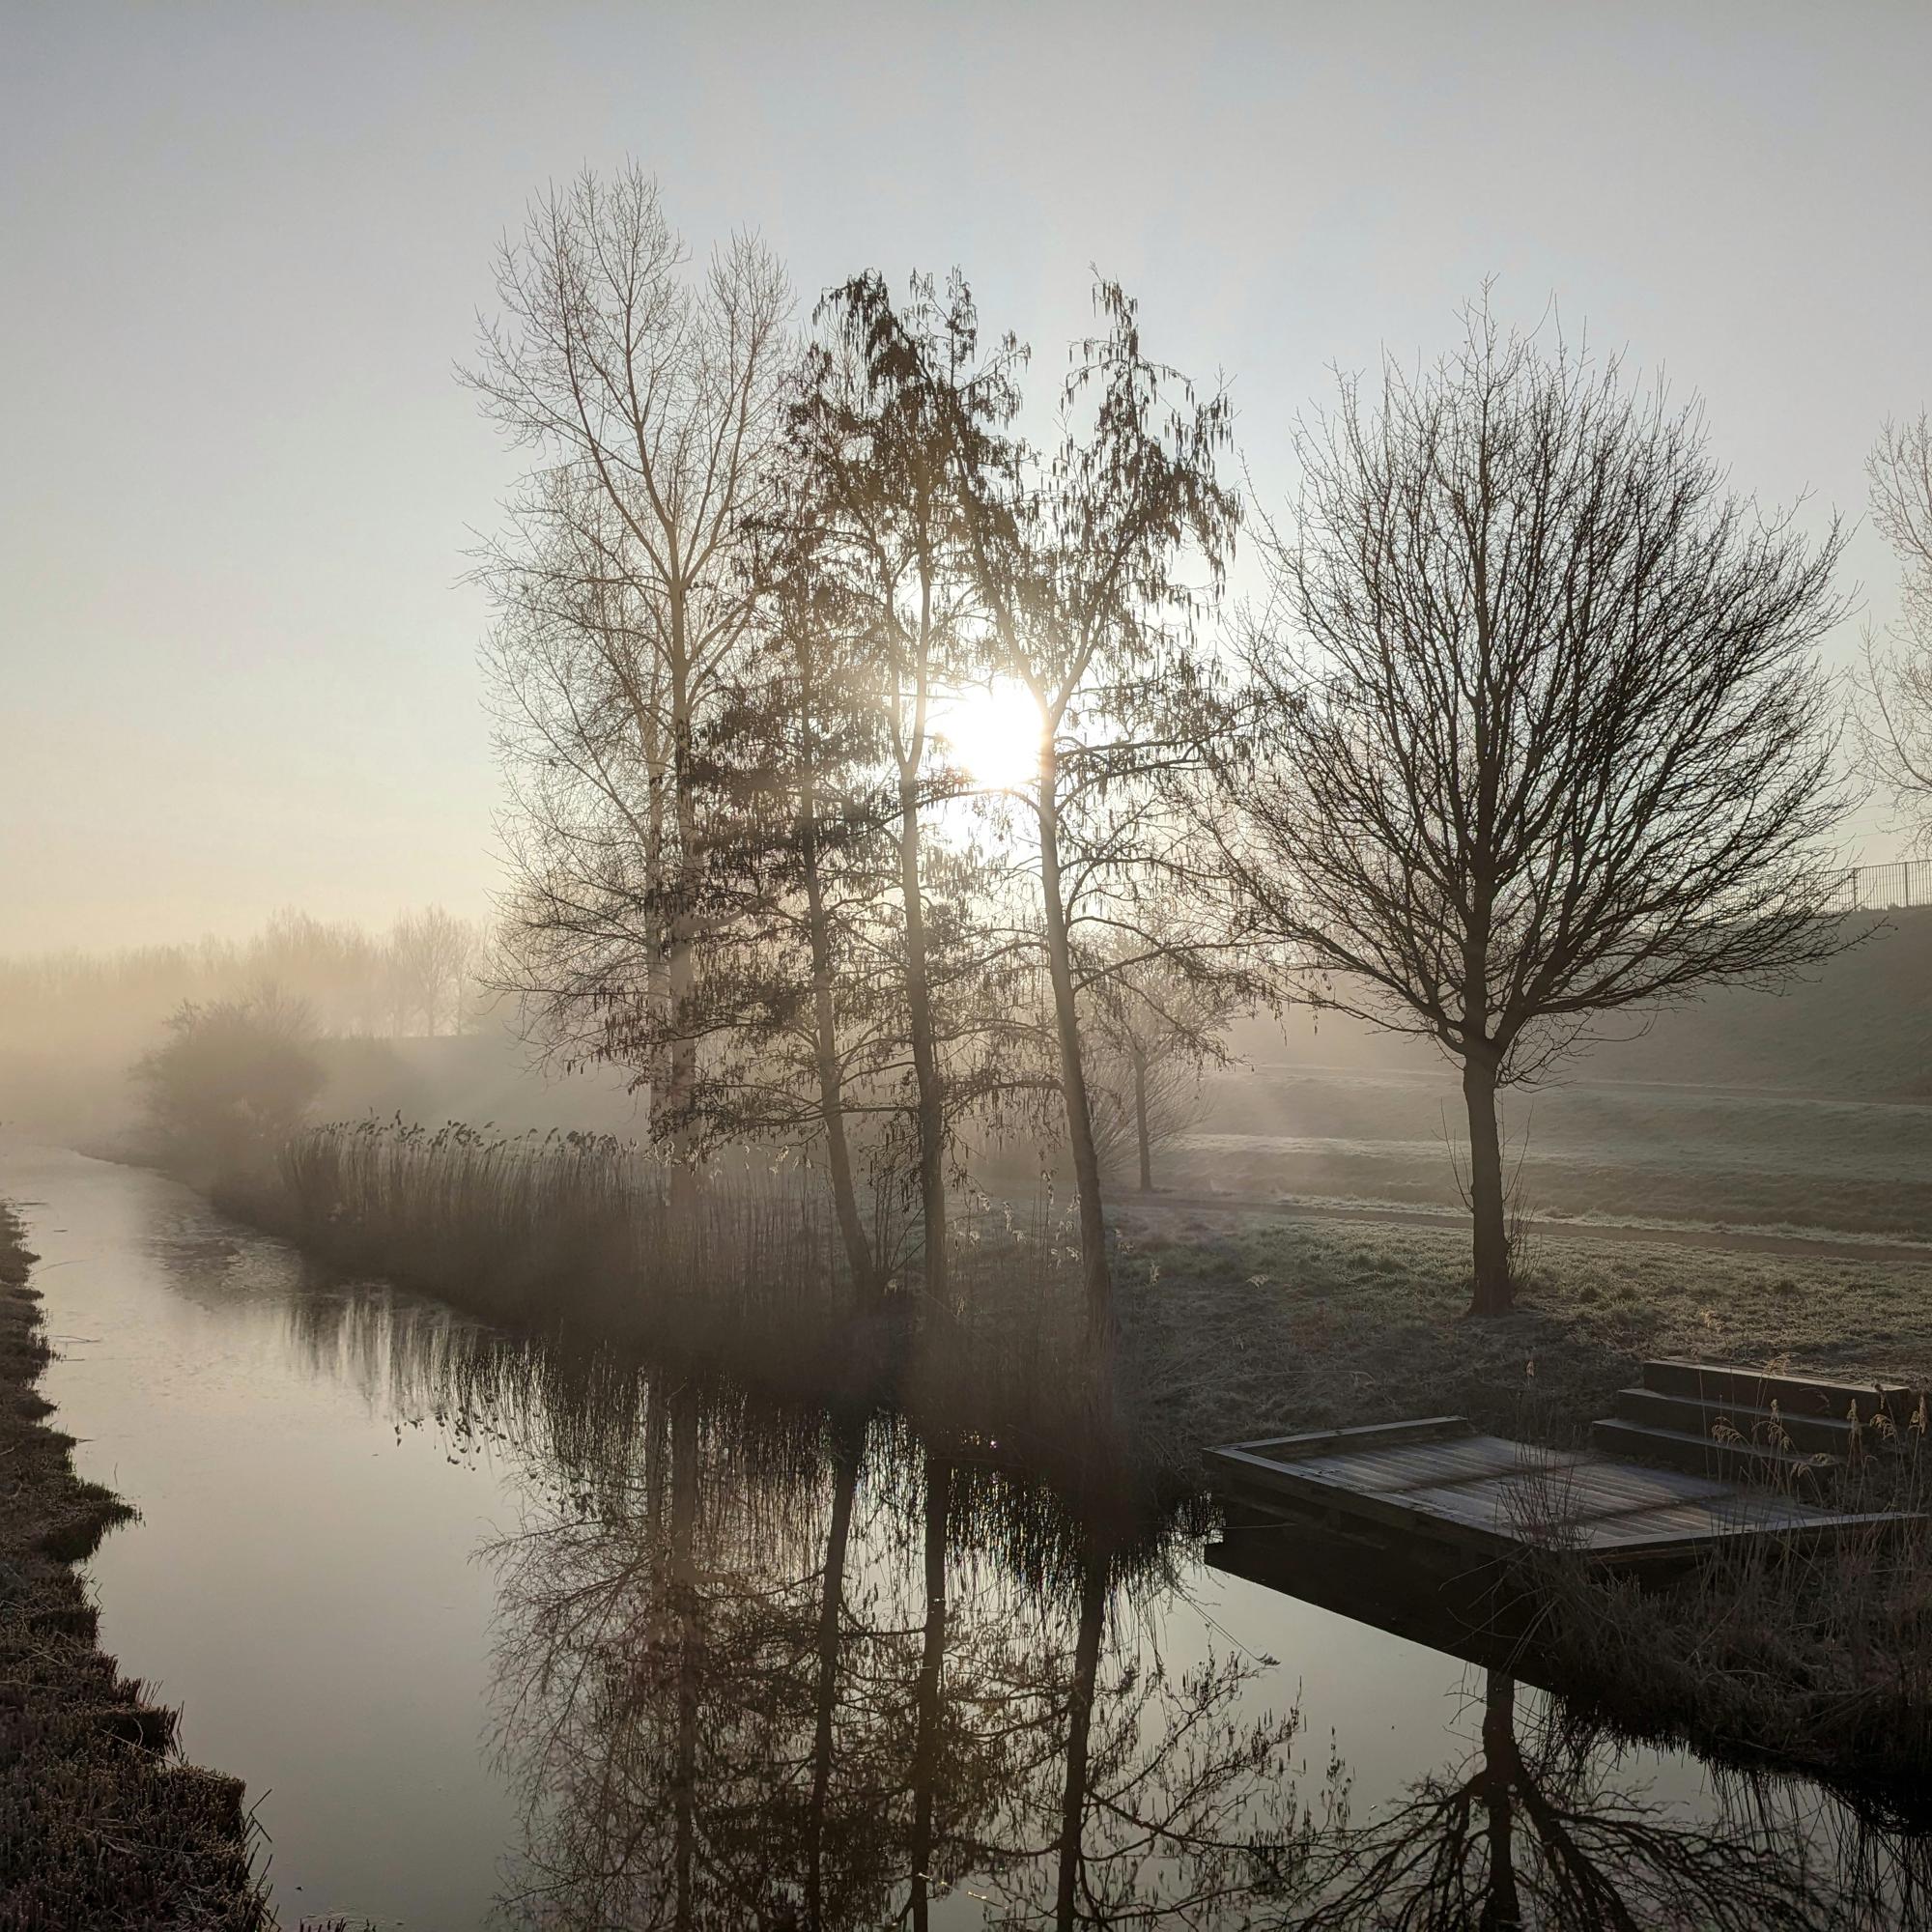 Cluster of trees in the fog with rays of sunlight, in front of a frosty canal